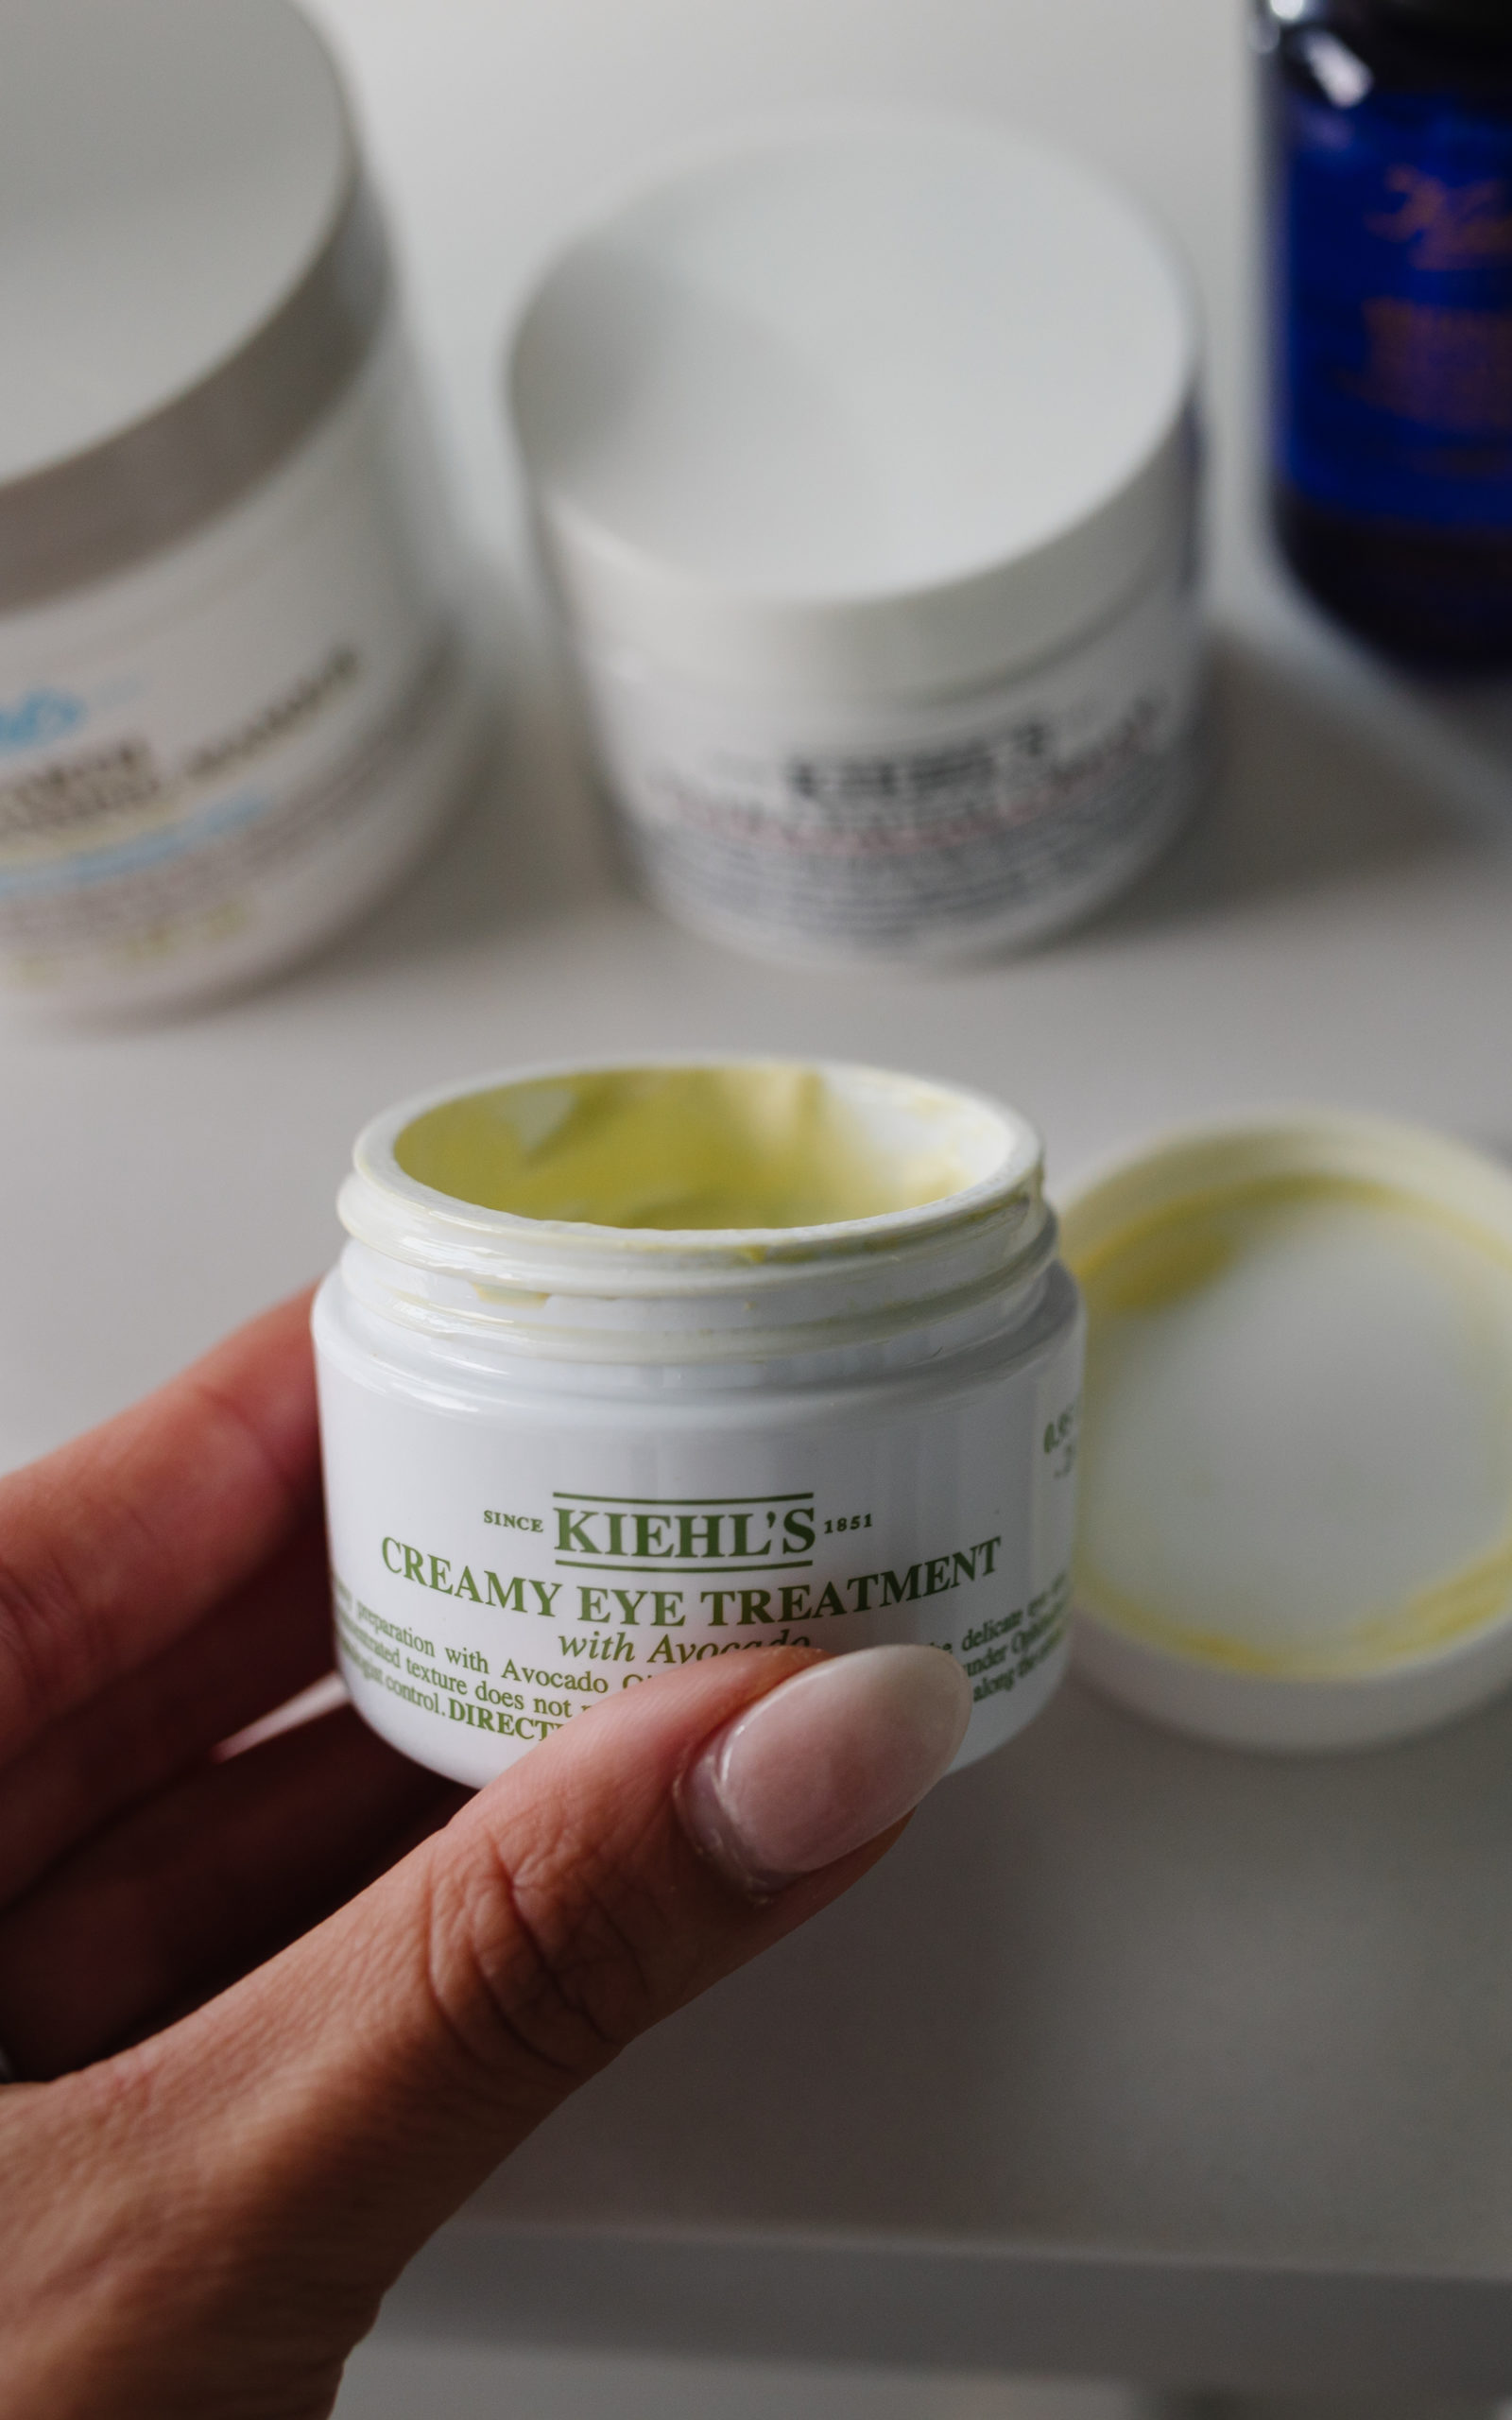 blogger hoang-kim cung reviews the kiehl's creamy eye treatment with avocado